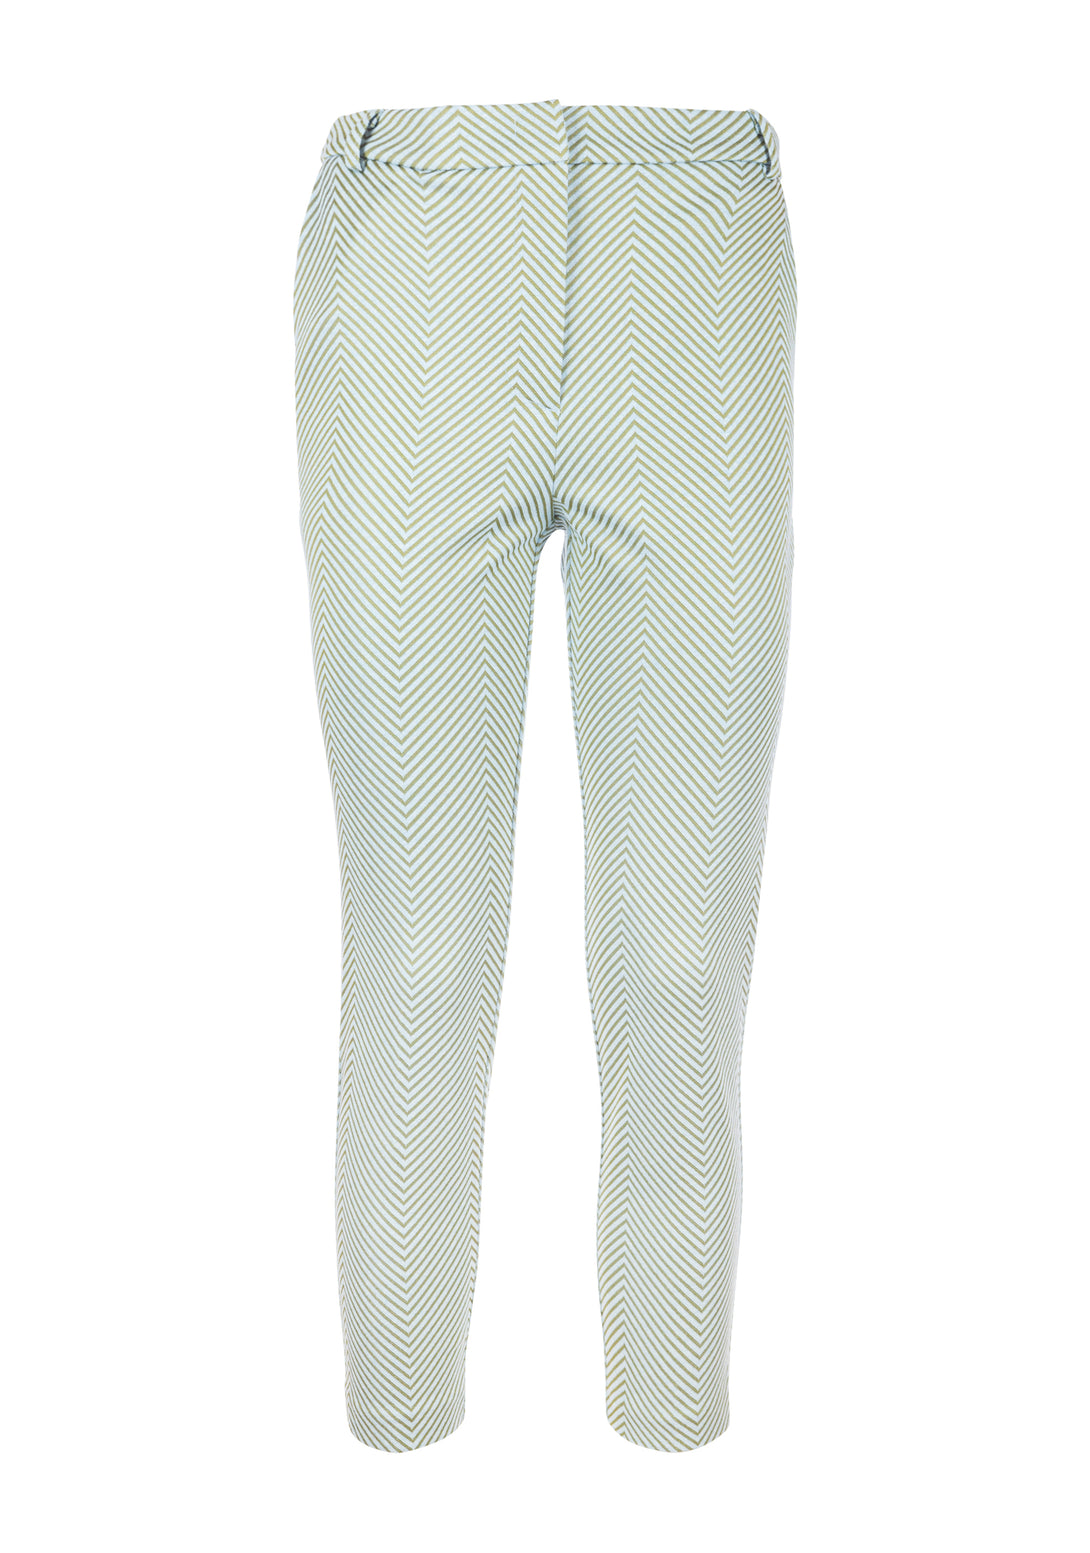 Pant slim fit with geometric pattern